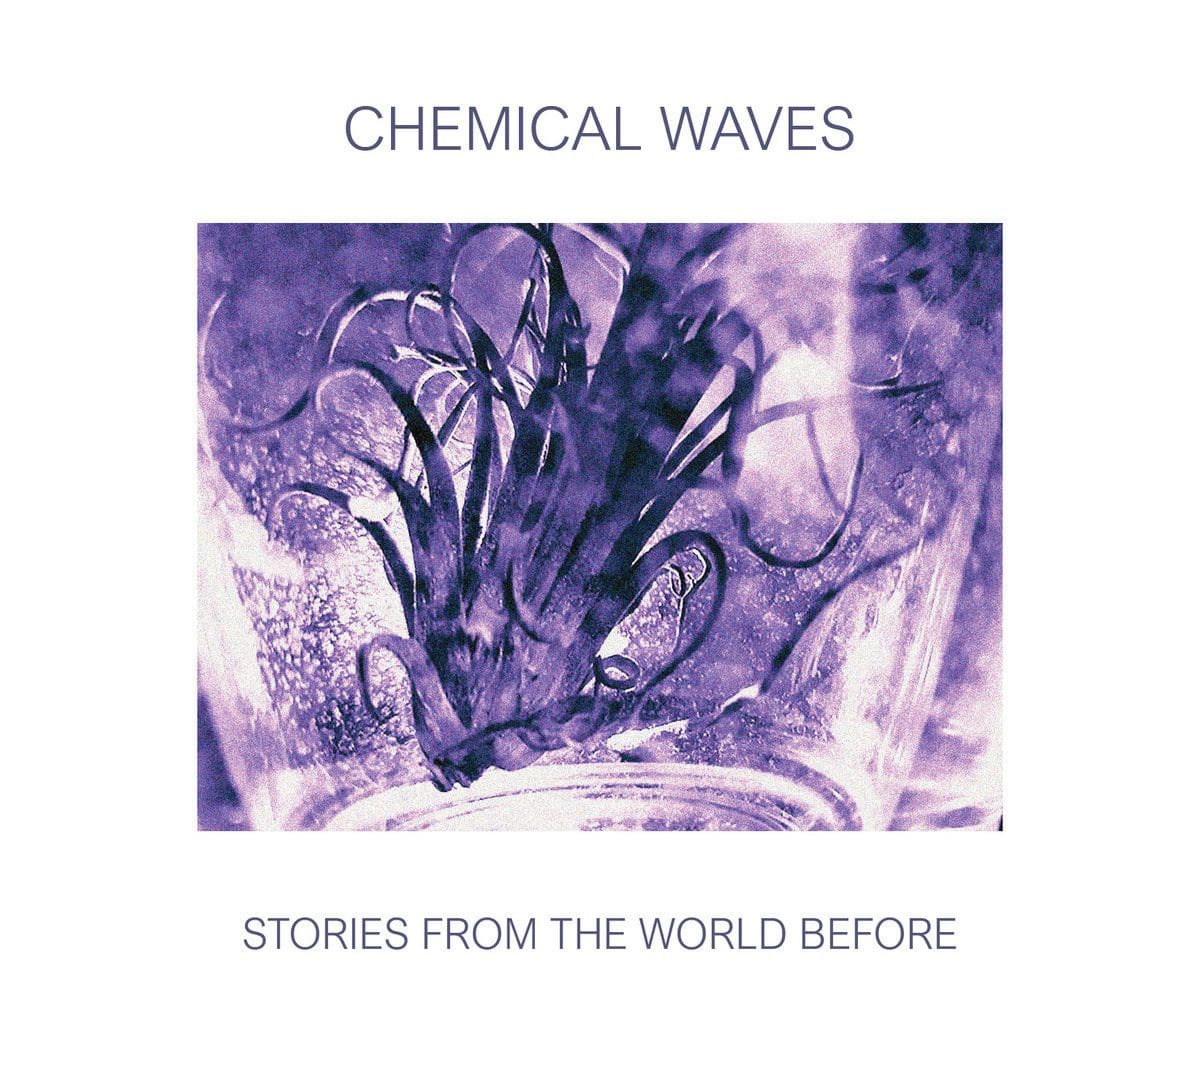 Italian post-punk act Chemical Waves returns with an all new album